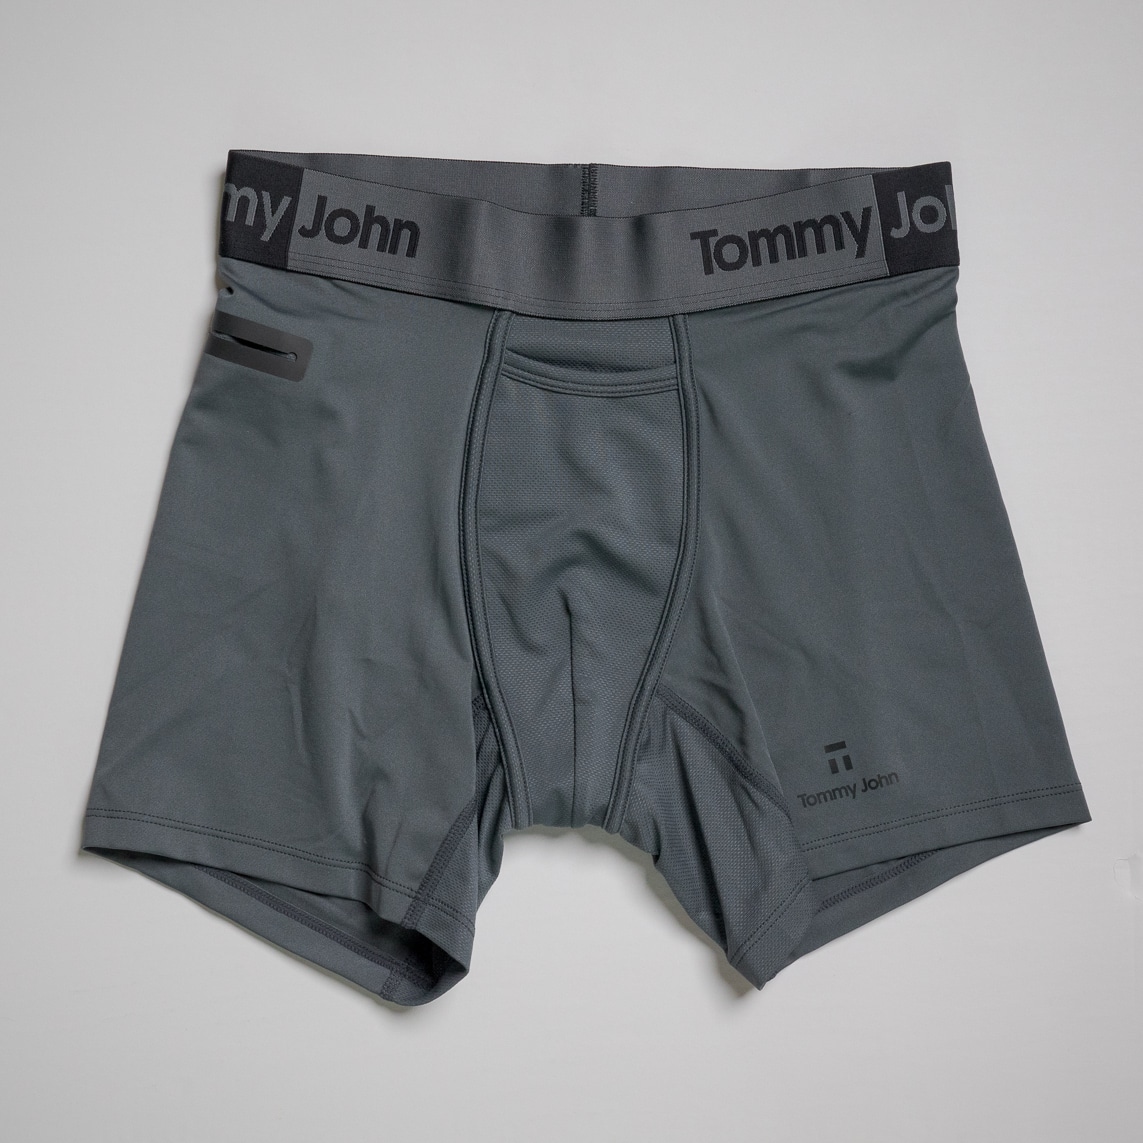 Tommy John launches Go Anywhere underwear line